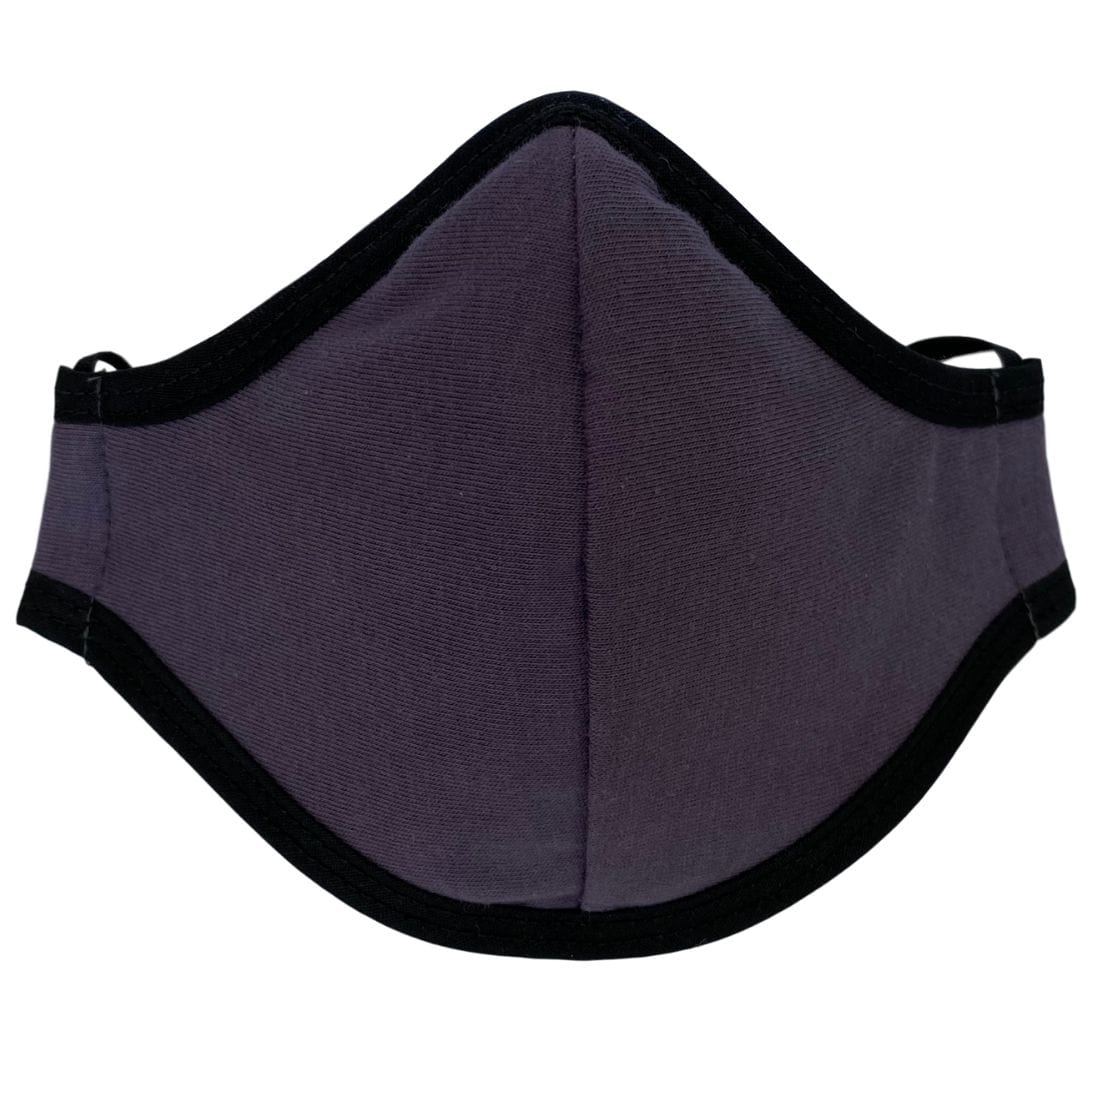 VetMed Solutions Organic Cotton Reusable Face Mask Three Layers (Adjustable 4 Inch Stiffener), Clearance 50% Off, Final Sale